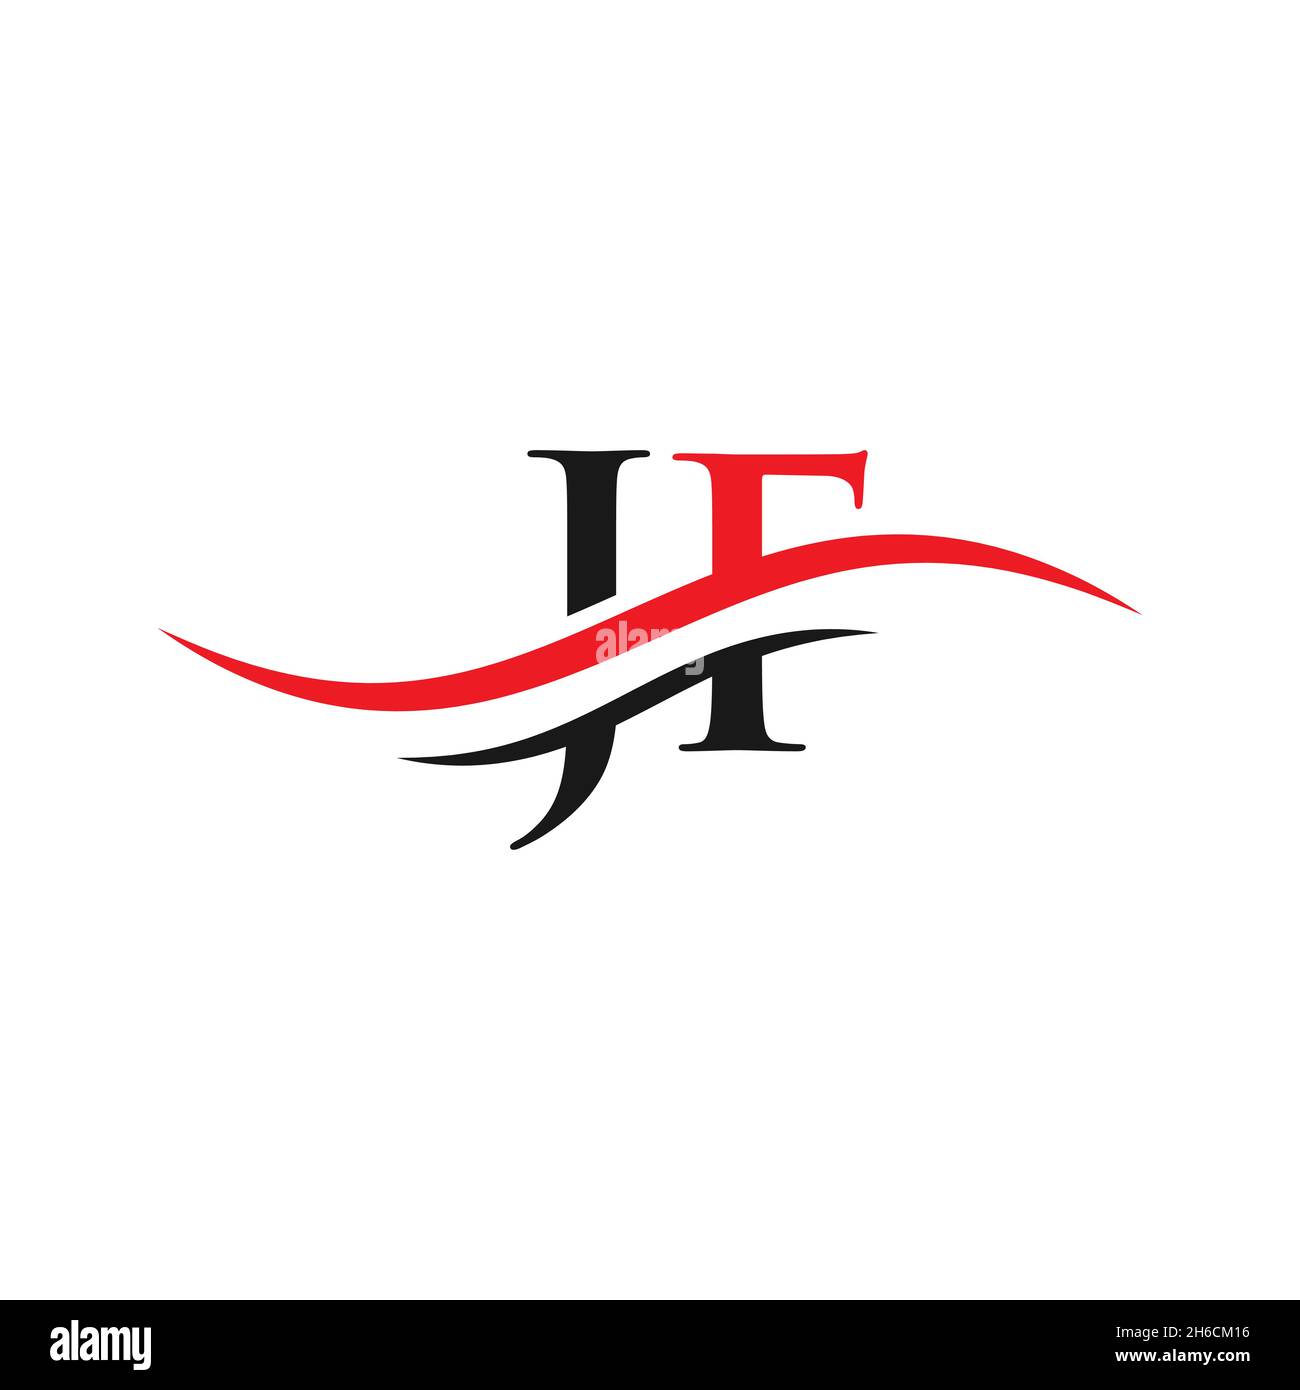 JF Collections | Watches | Accessories | JF Collections